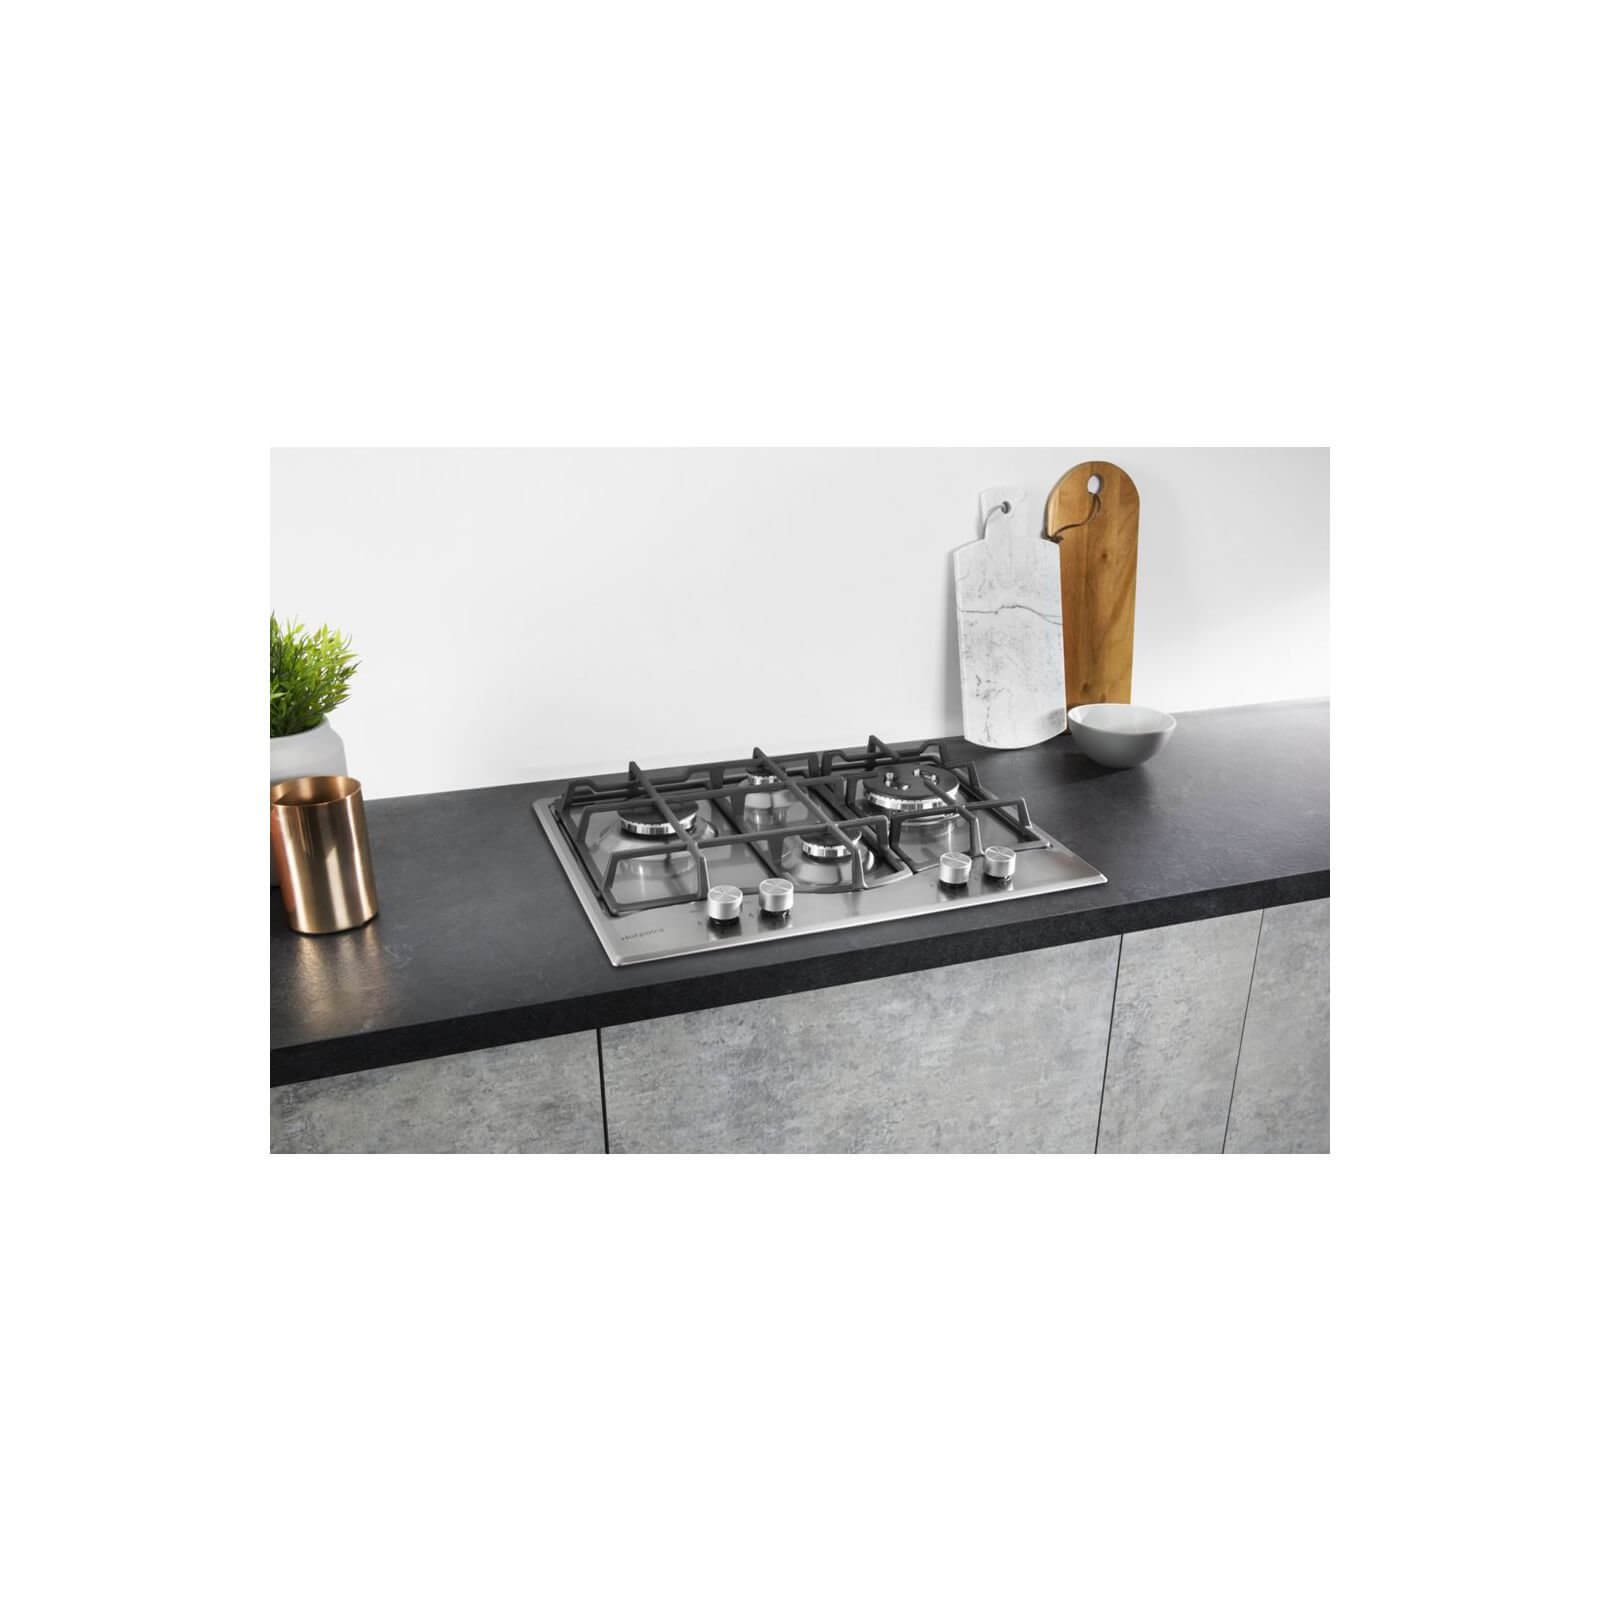 Hotpoint PCN 641 T/IX/H Built-in Gas Hob - Stainless Steel